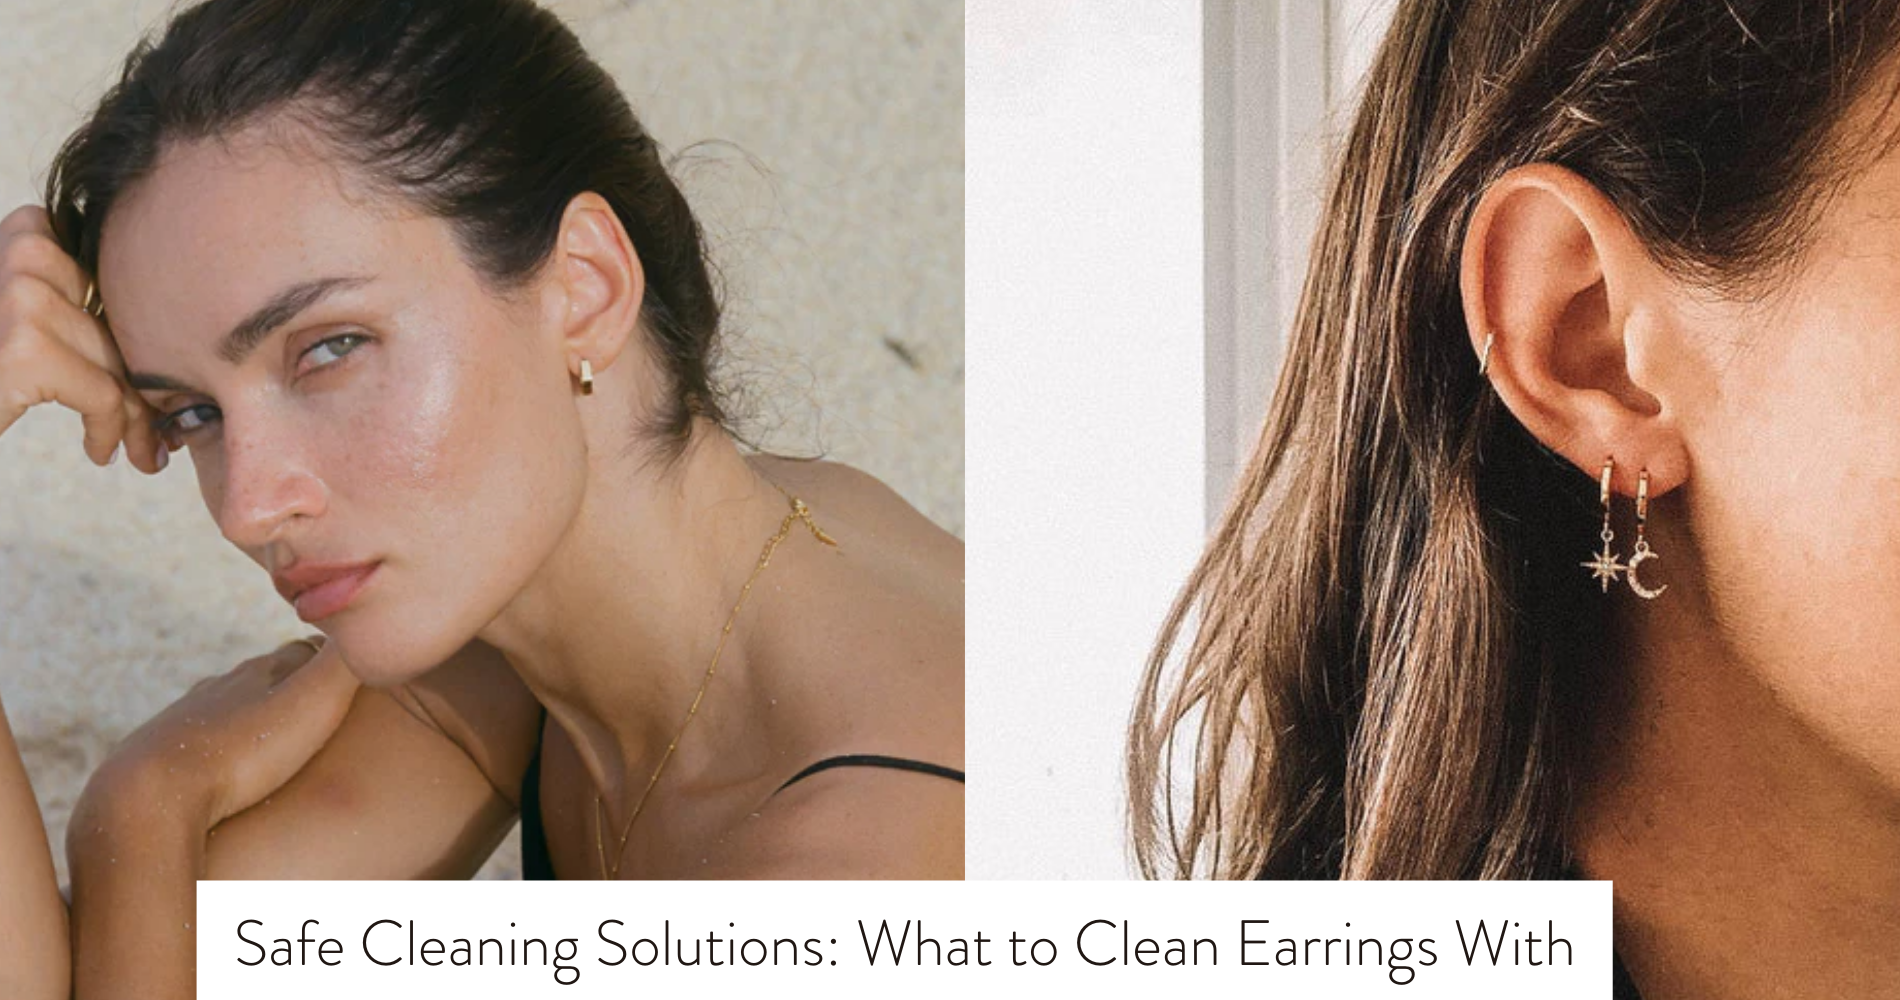 what can you clean earrings with